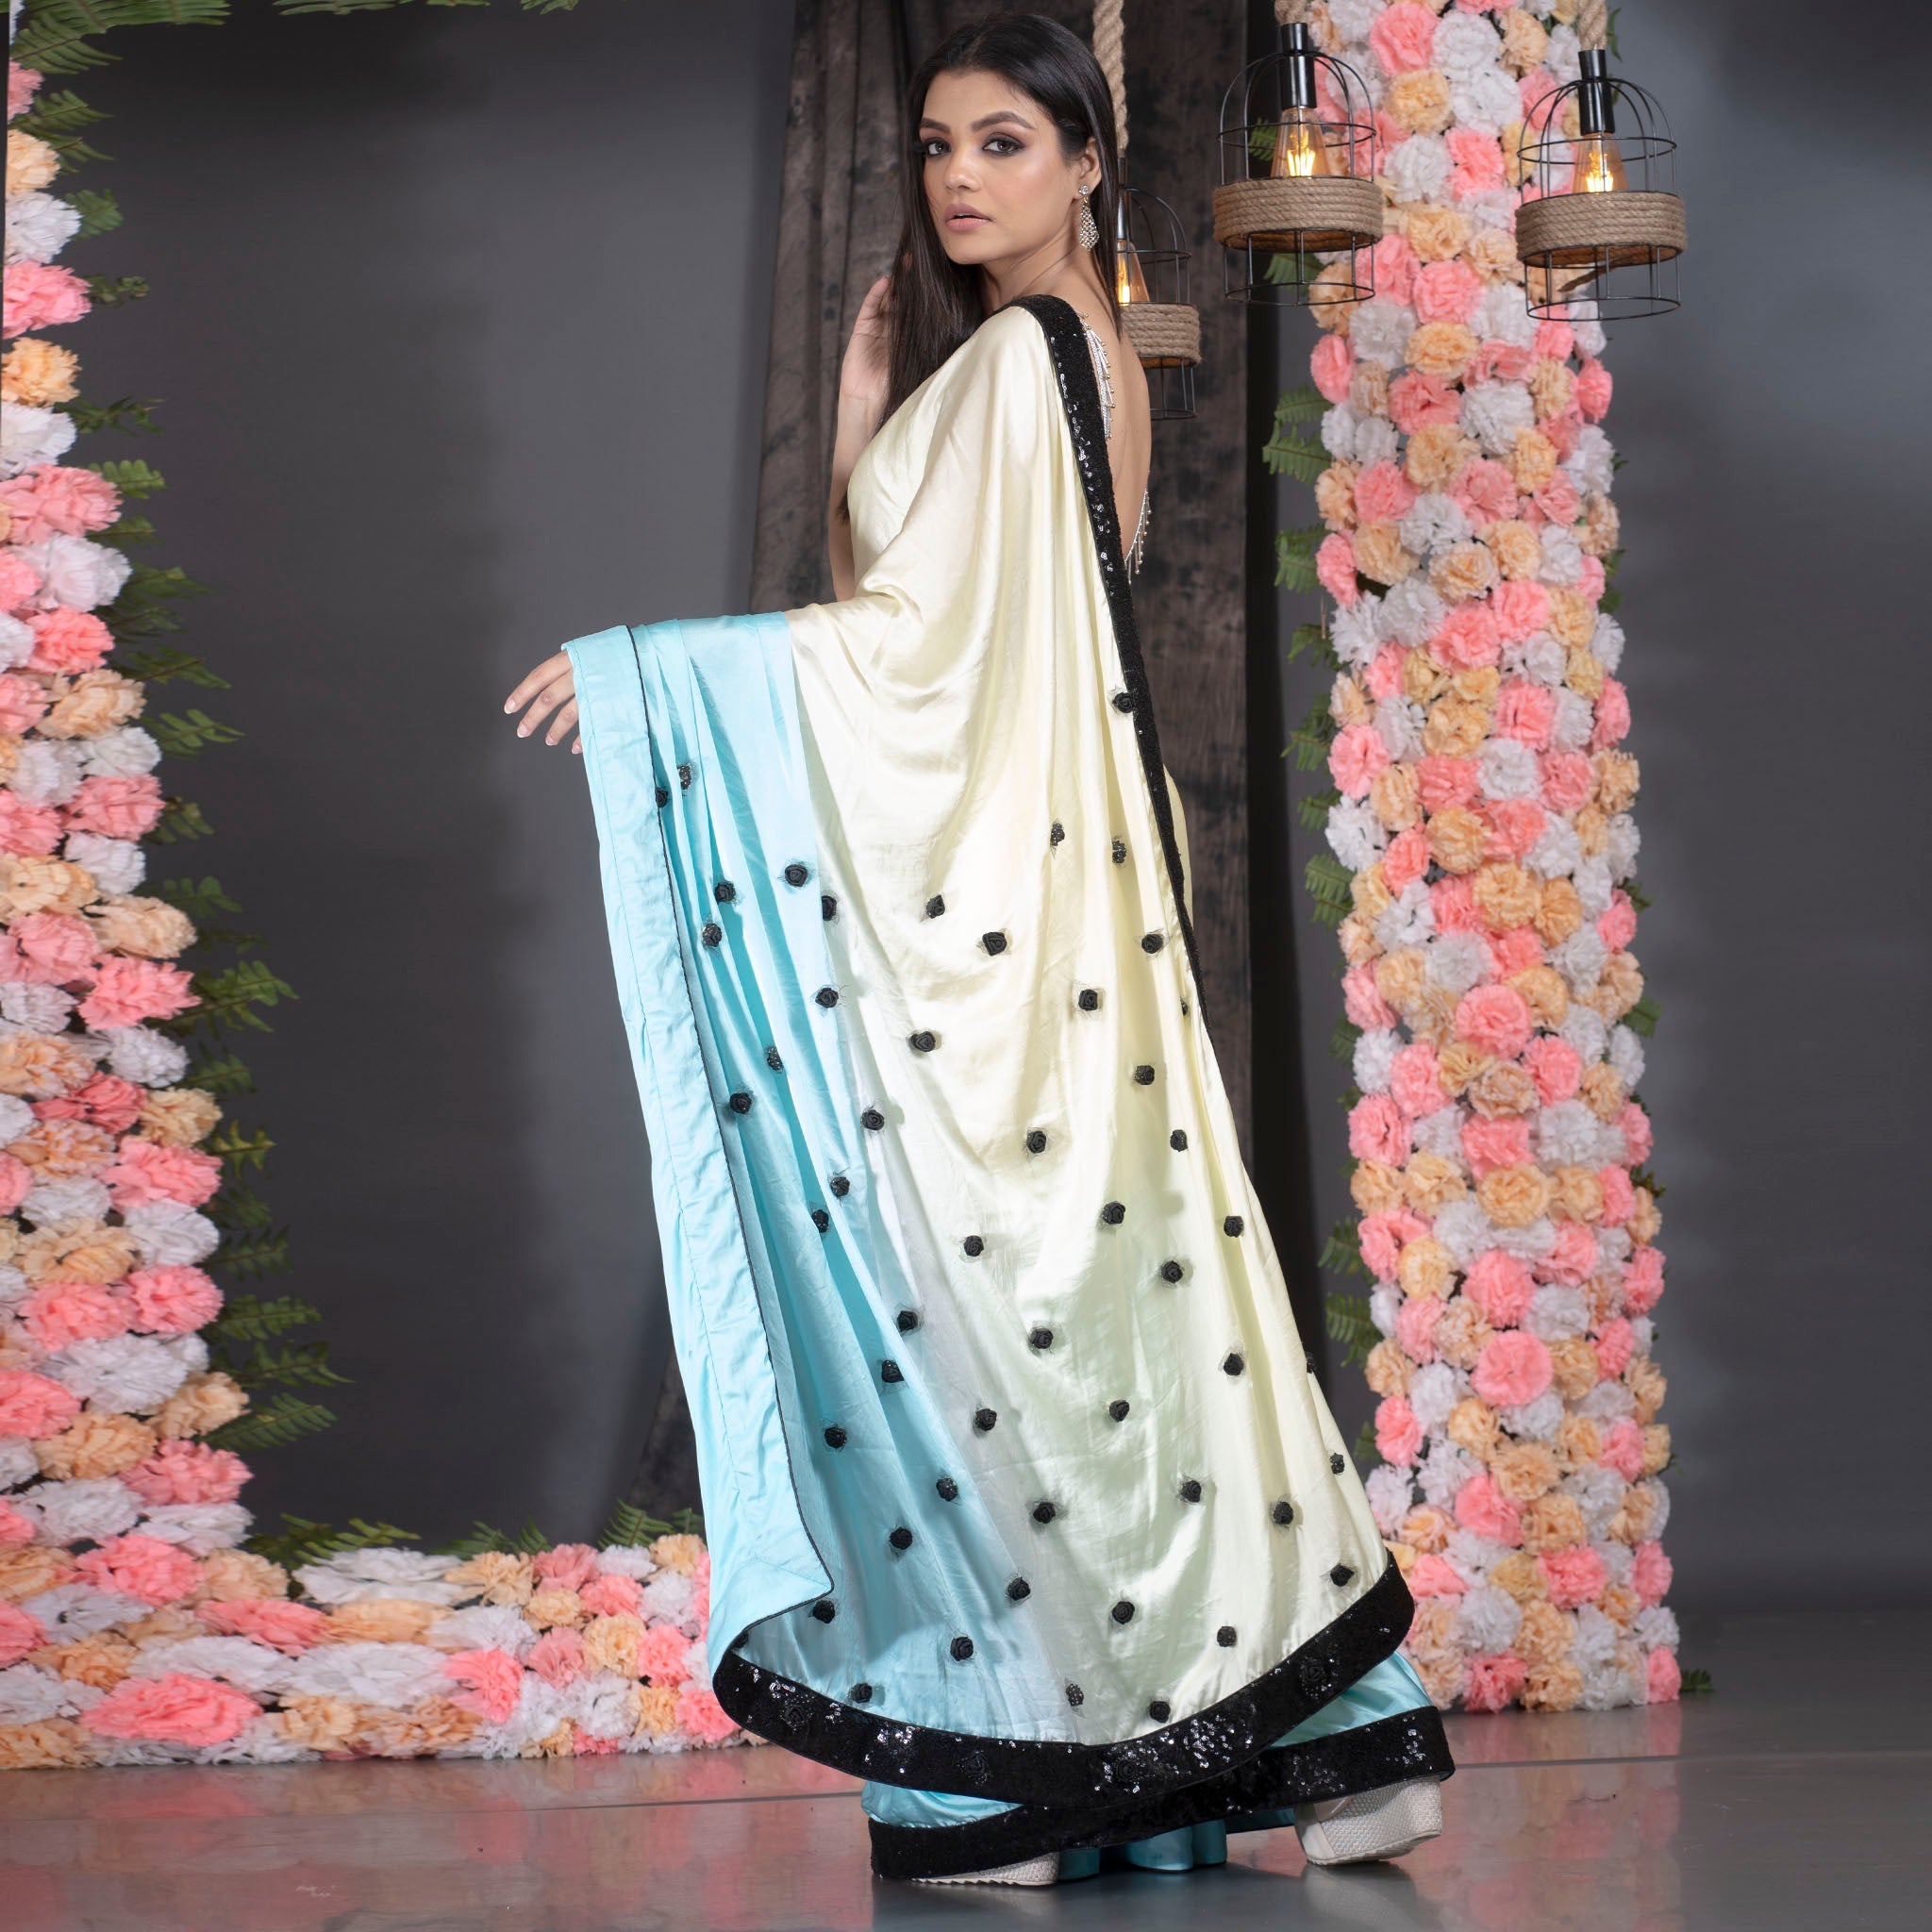 Women's Lime Yellow And Aqua Blue Ombre Satin Saree With Sequin Lace Border And Handmade Rosette Pallu - Boveee